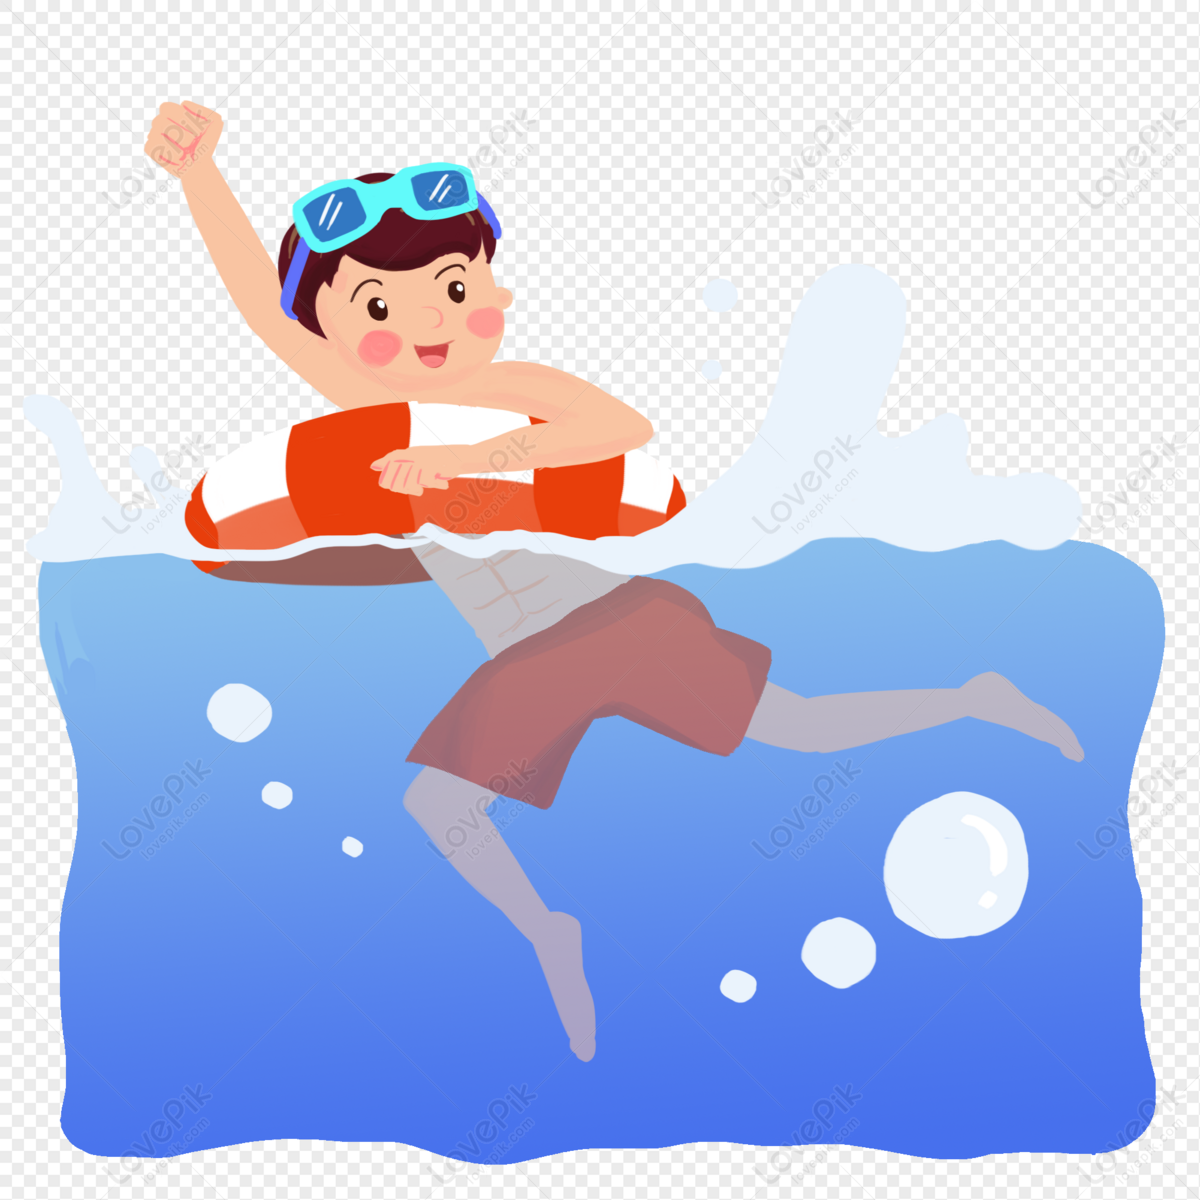 A Swimming Boy PNG Image Free Download And Clipart Image For Free ...